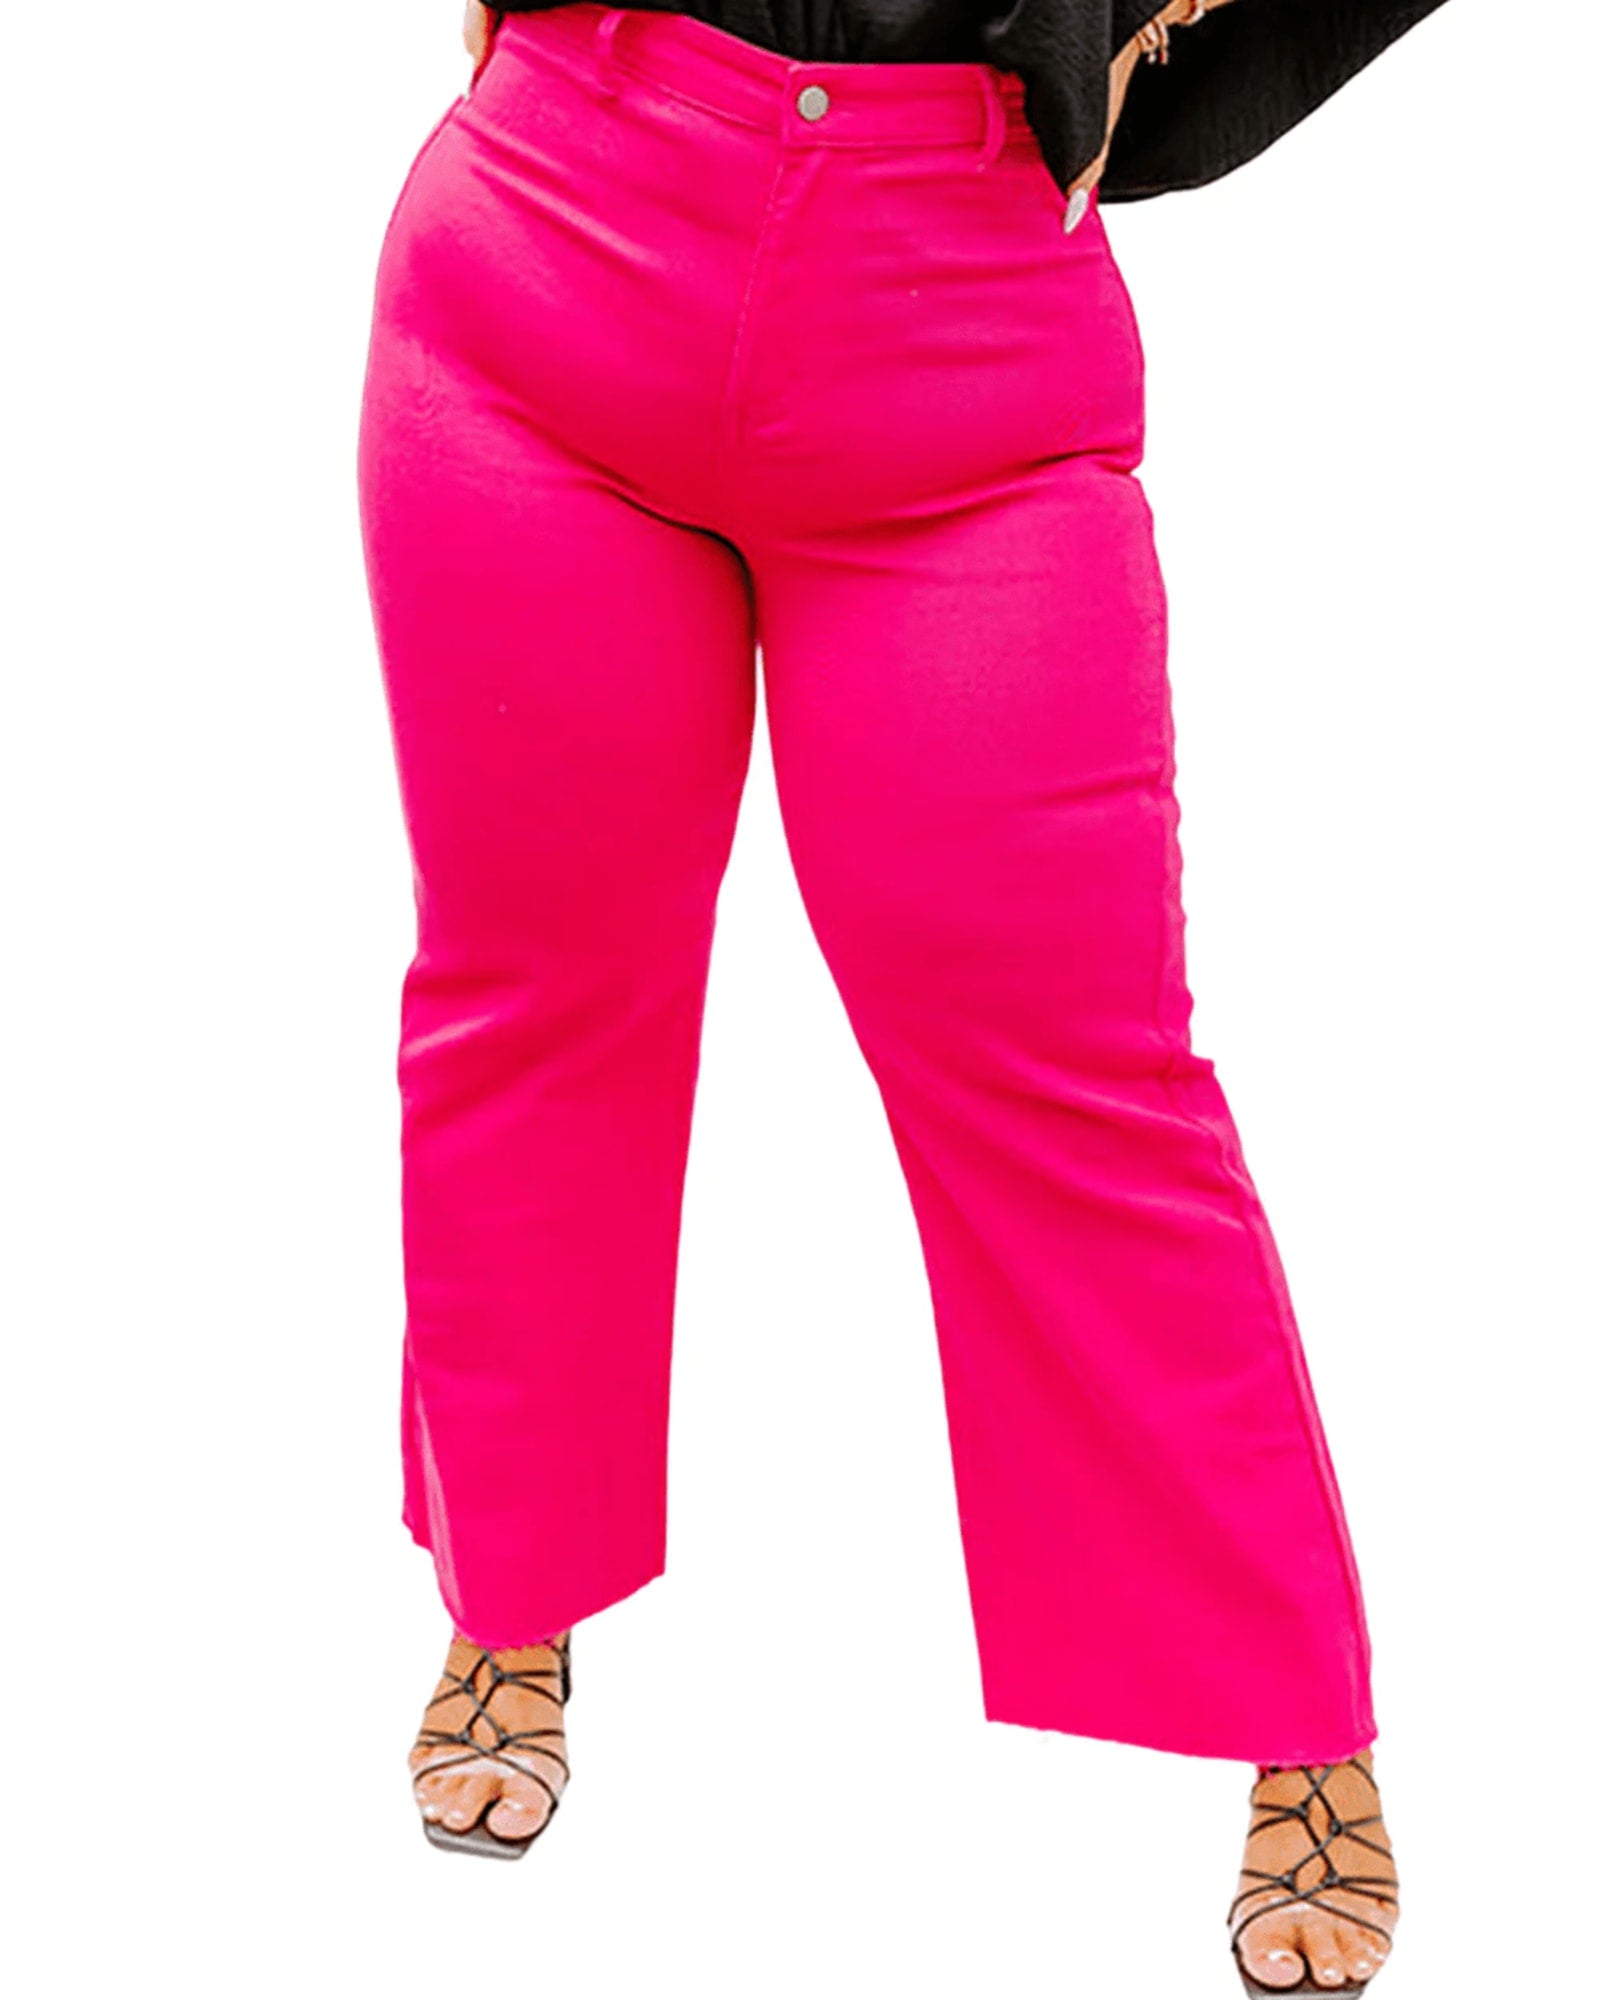 Plus Size Ruth High Waisted Flare Pants